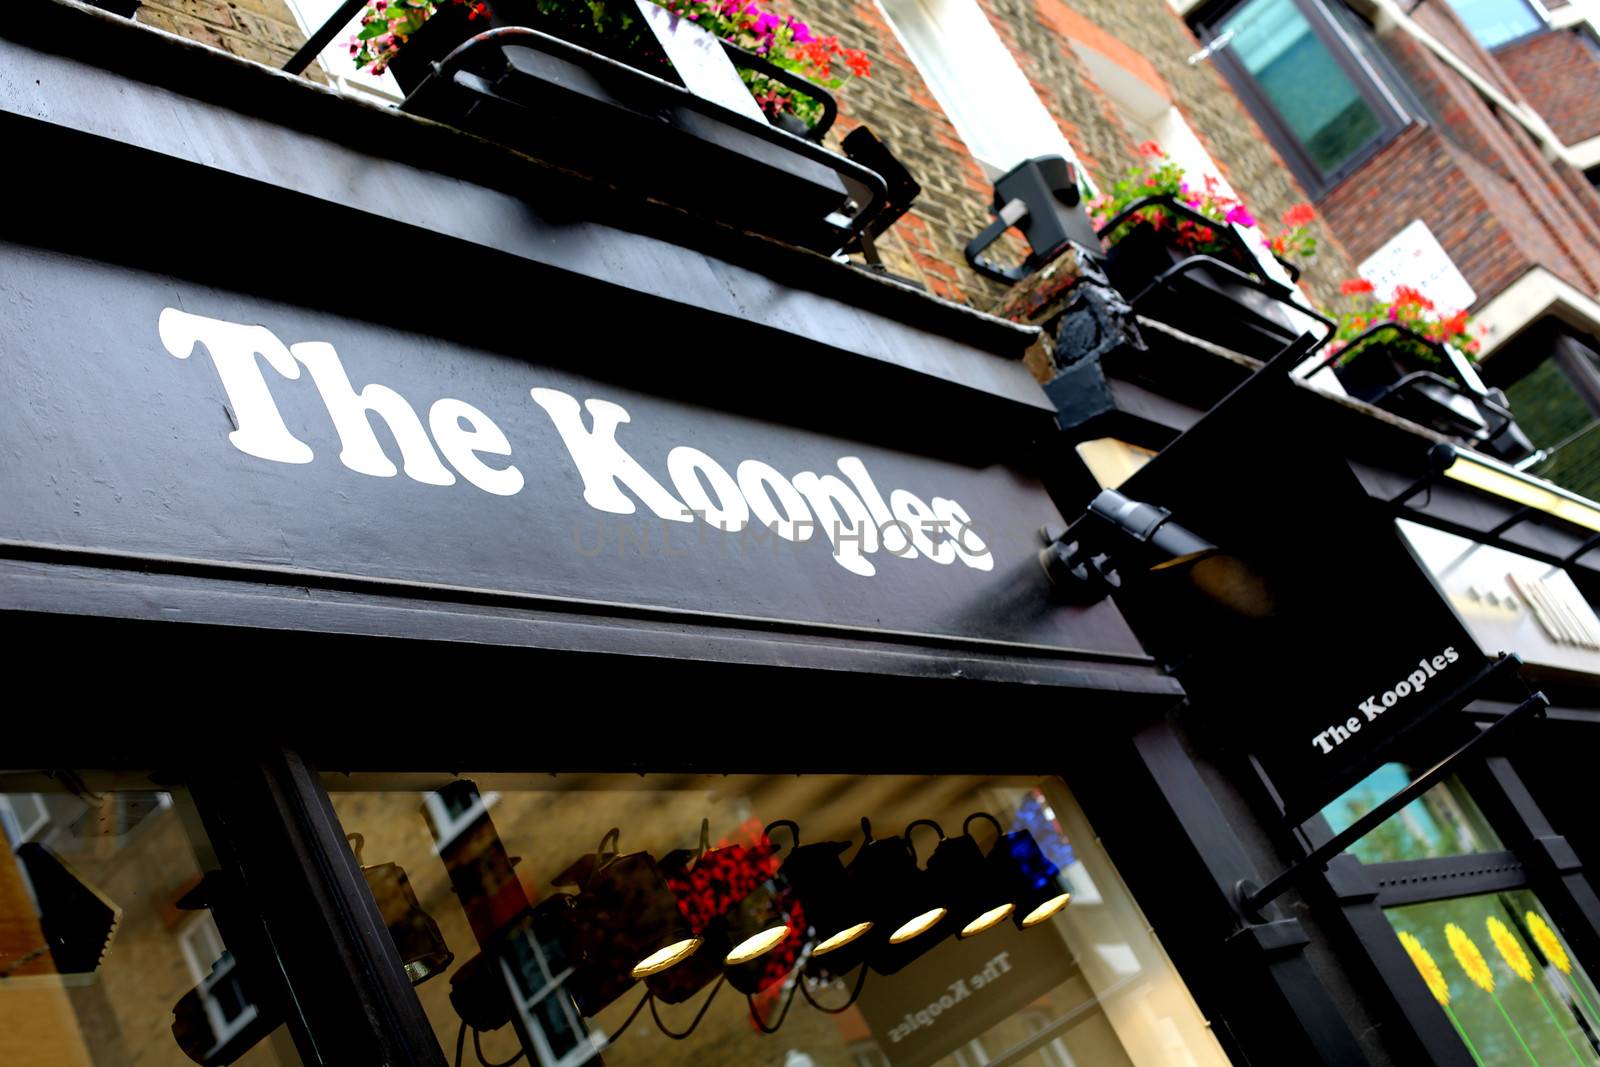 The Kooples Shop Sign Carnaby Street London by Whiteboxmedia